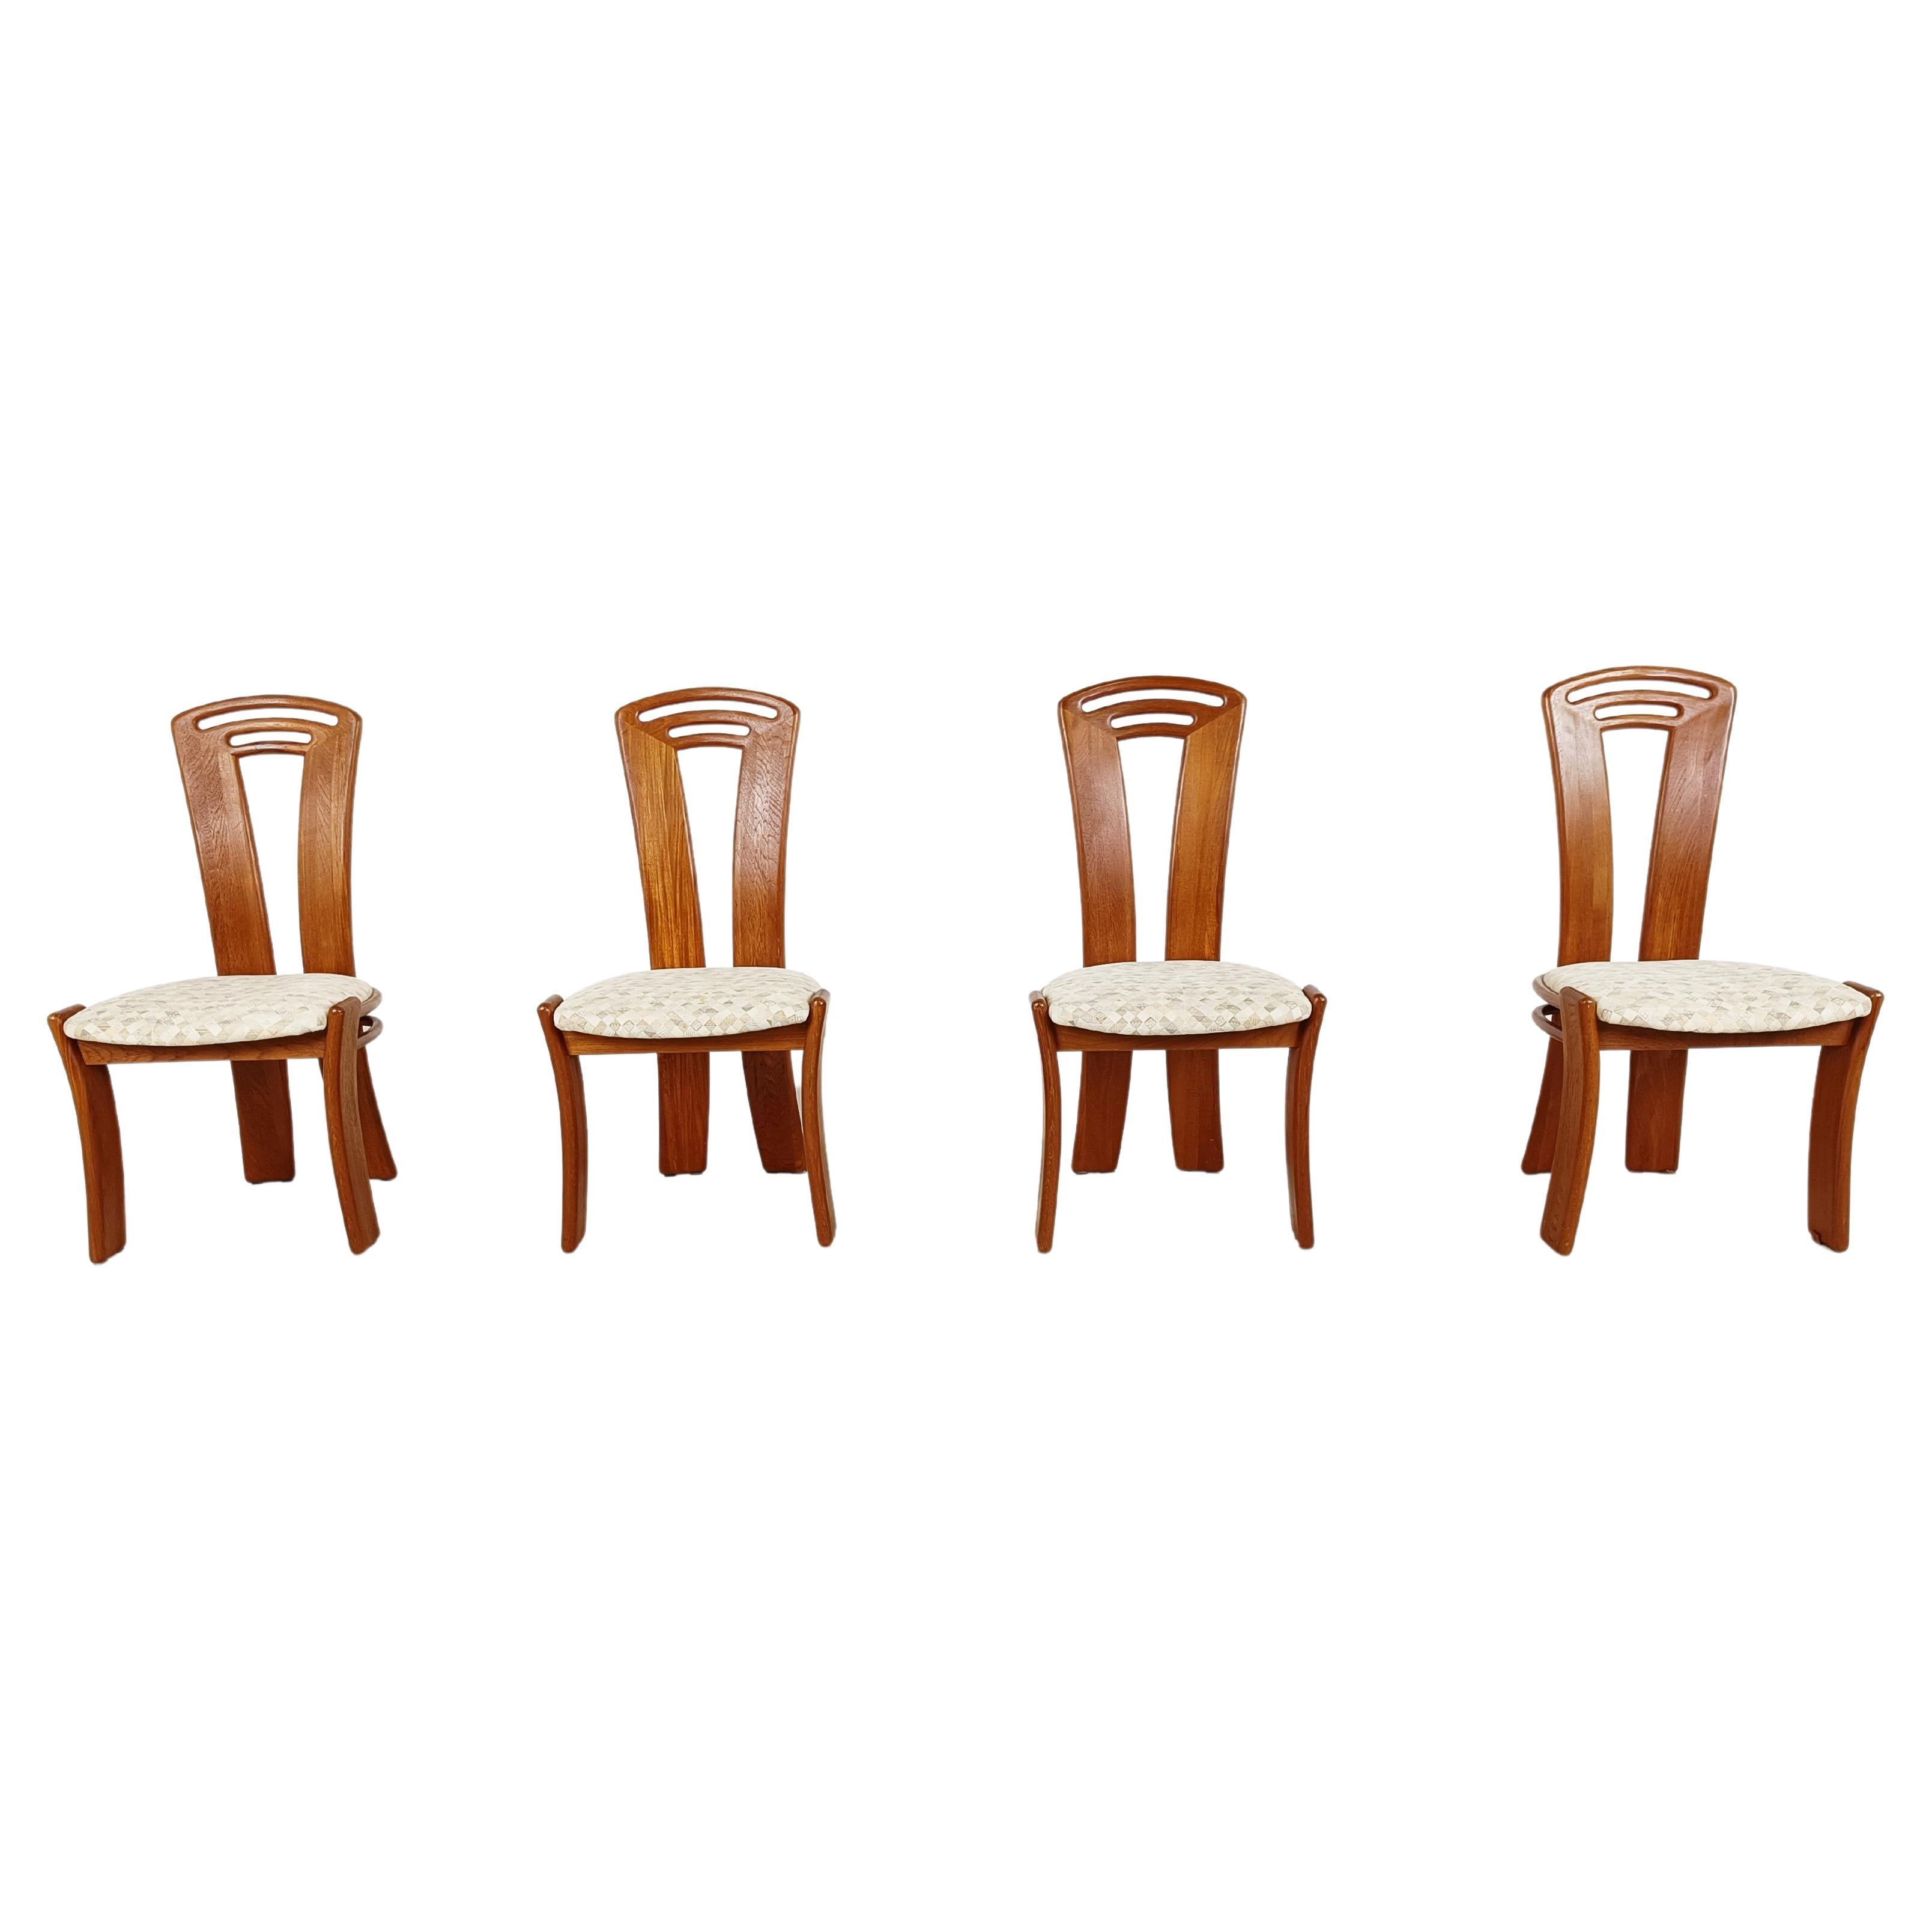 Set of 4 Vintage Scandinavian Dining Chairs, 1960s